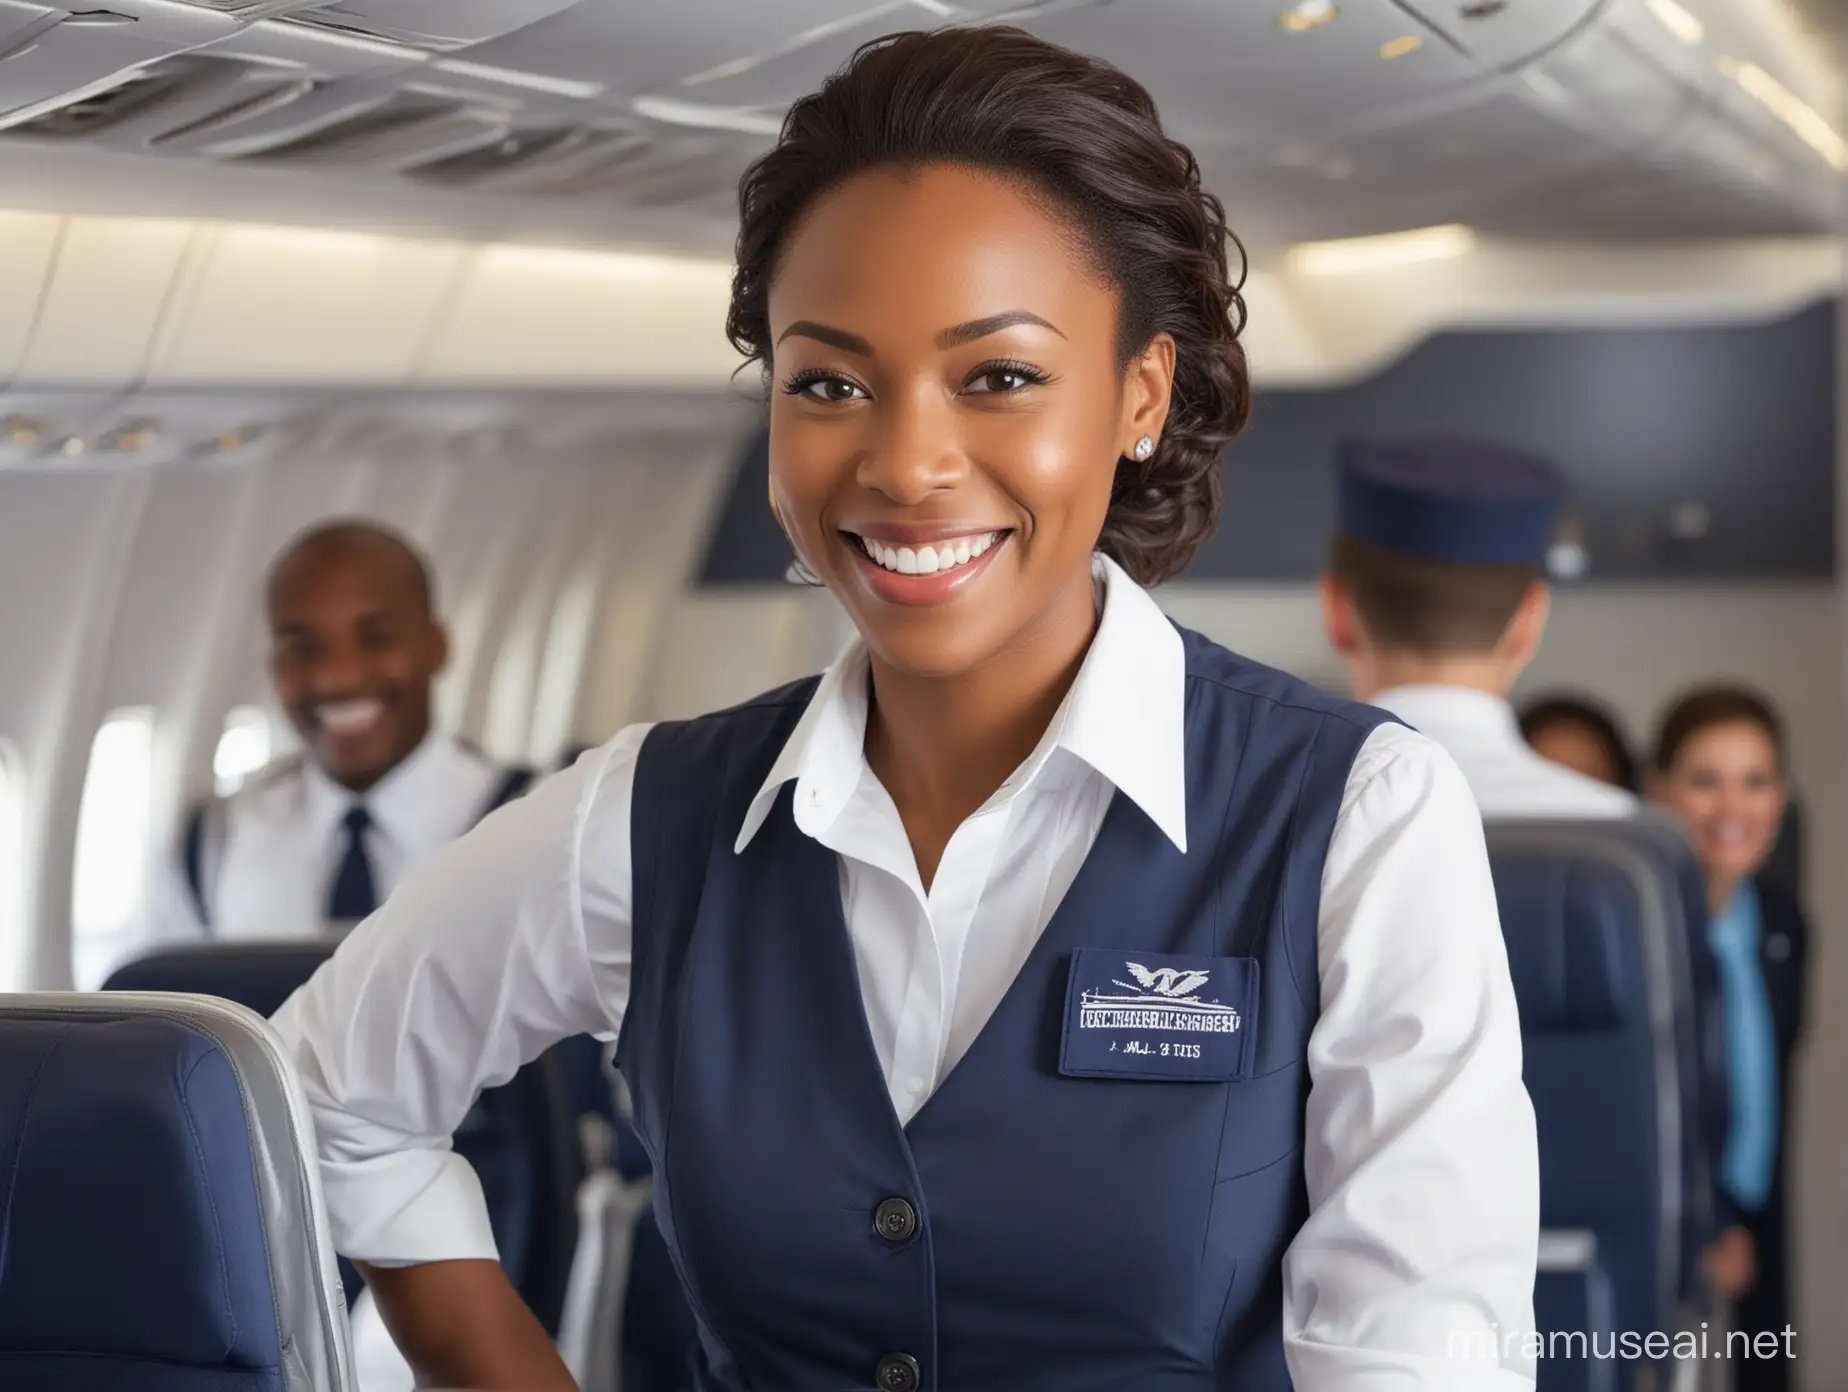 Smiling African American Flight Attendant in White Shirt and Navy Blue Vest